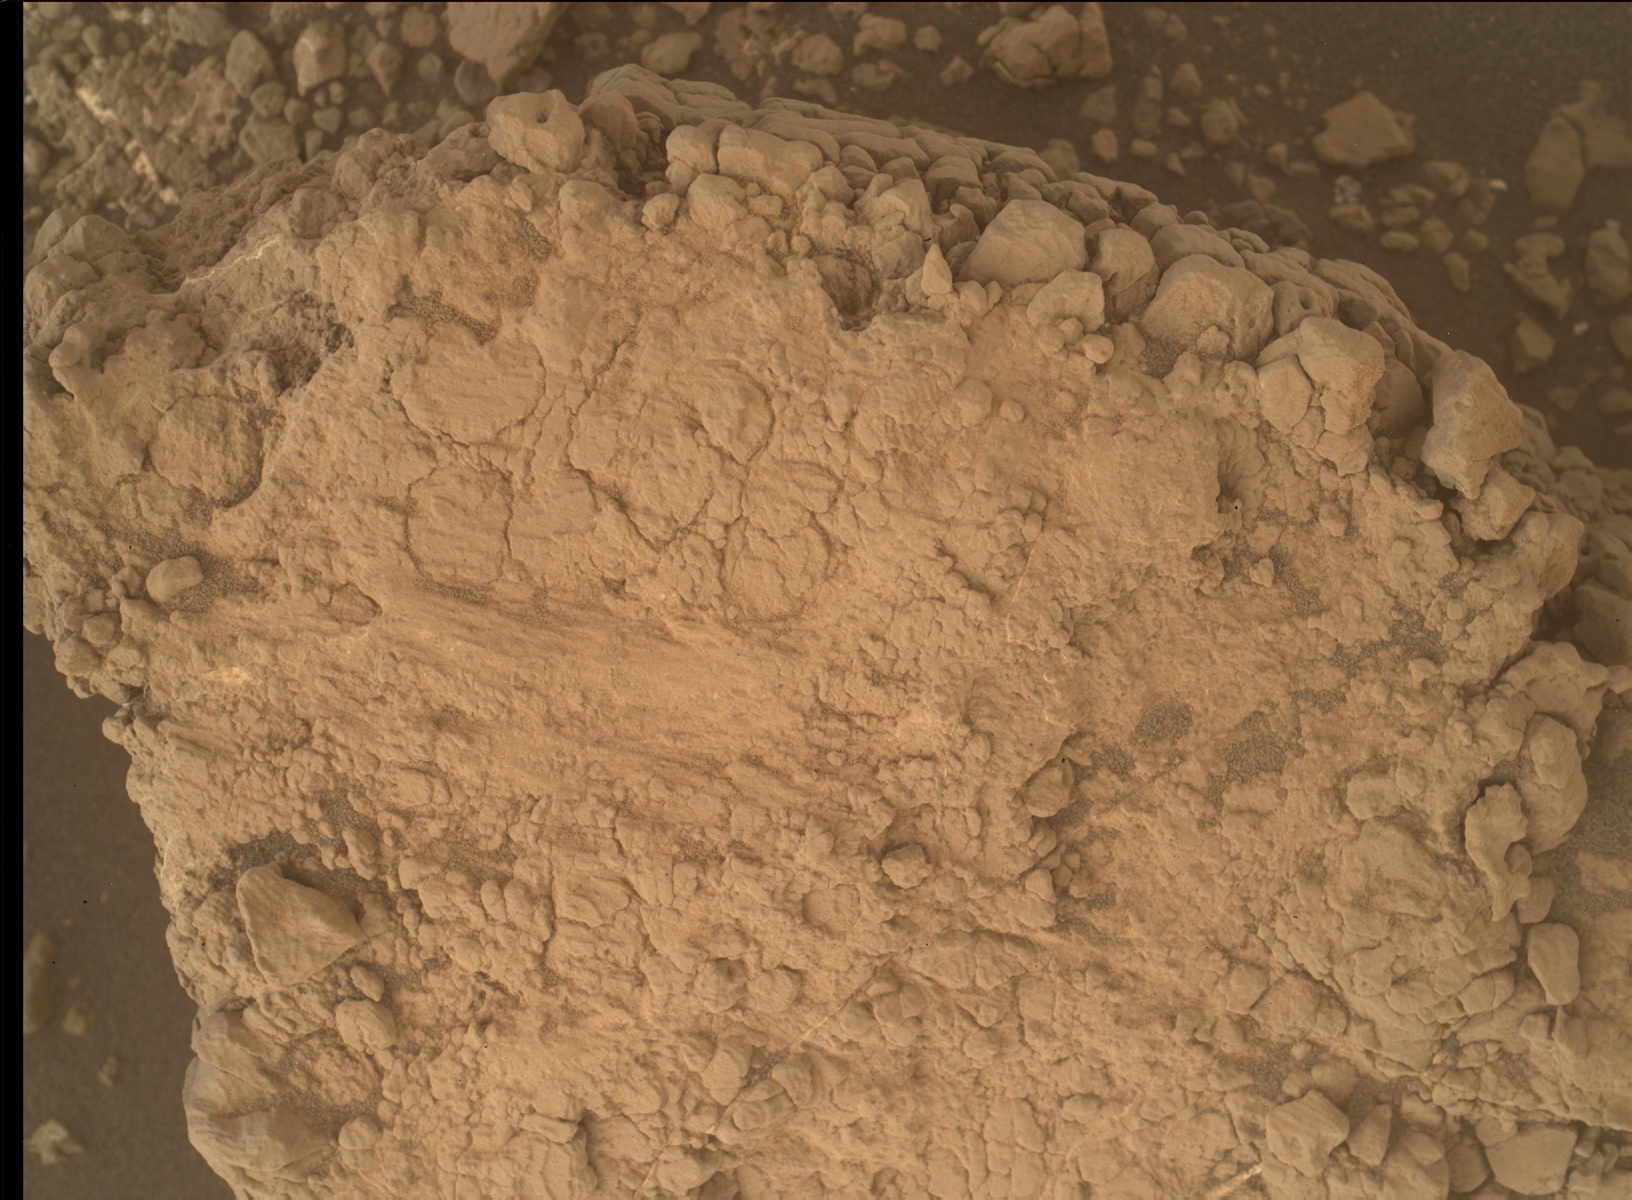 Nasa's Mars rover Curiosity acquired this image using its Mars Hand Lens Imager (MAHLI) on Sol 2567